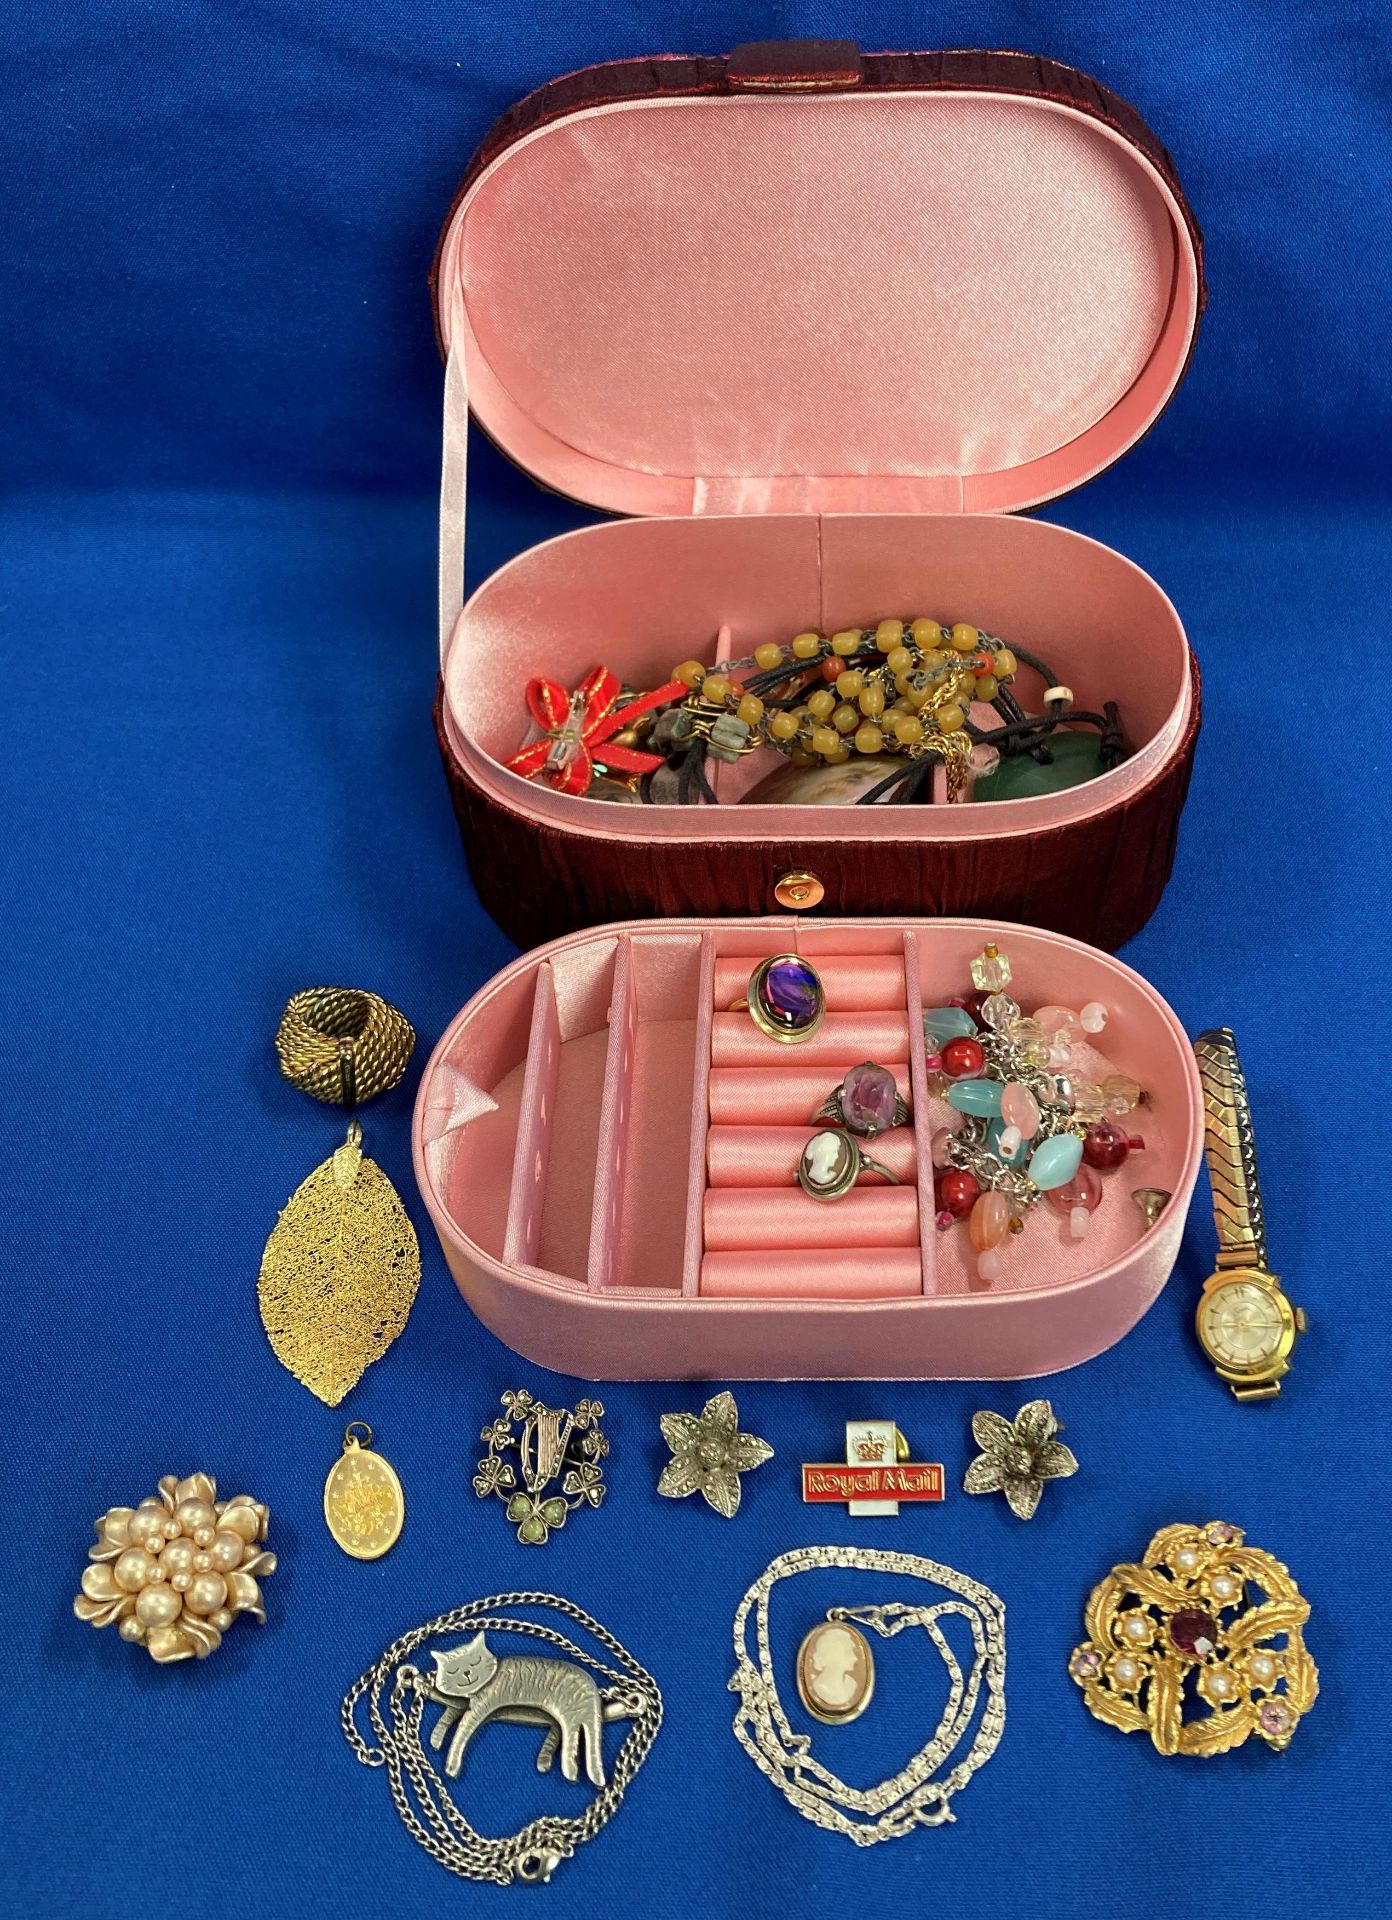 Contents to jewellery box - assorted vintage silver jewellery including Irish marcasite brooch with